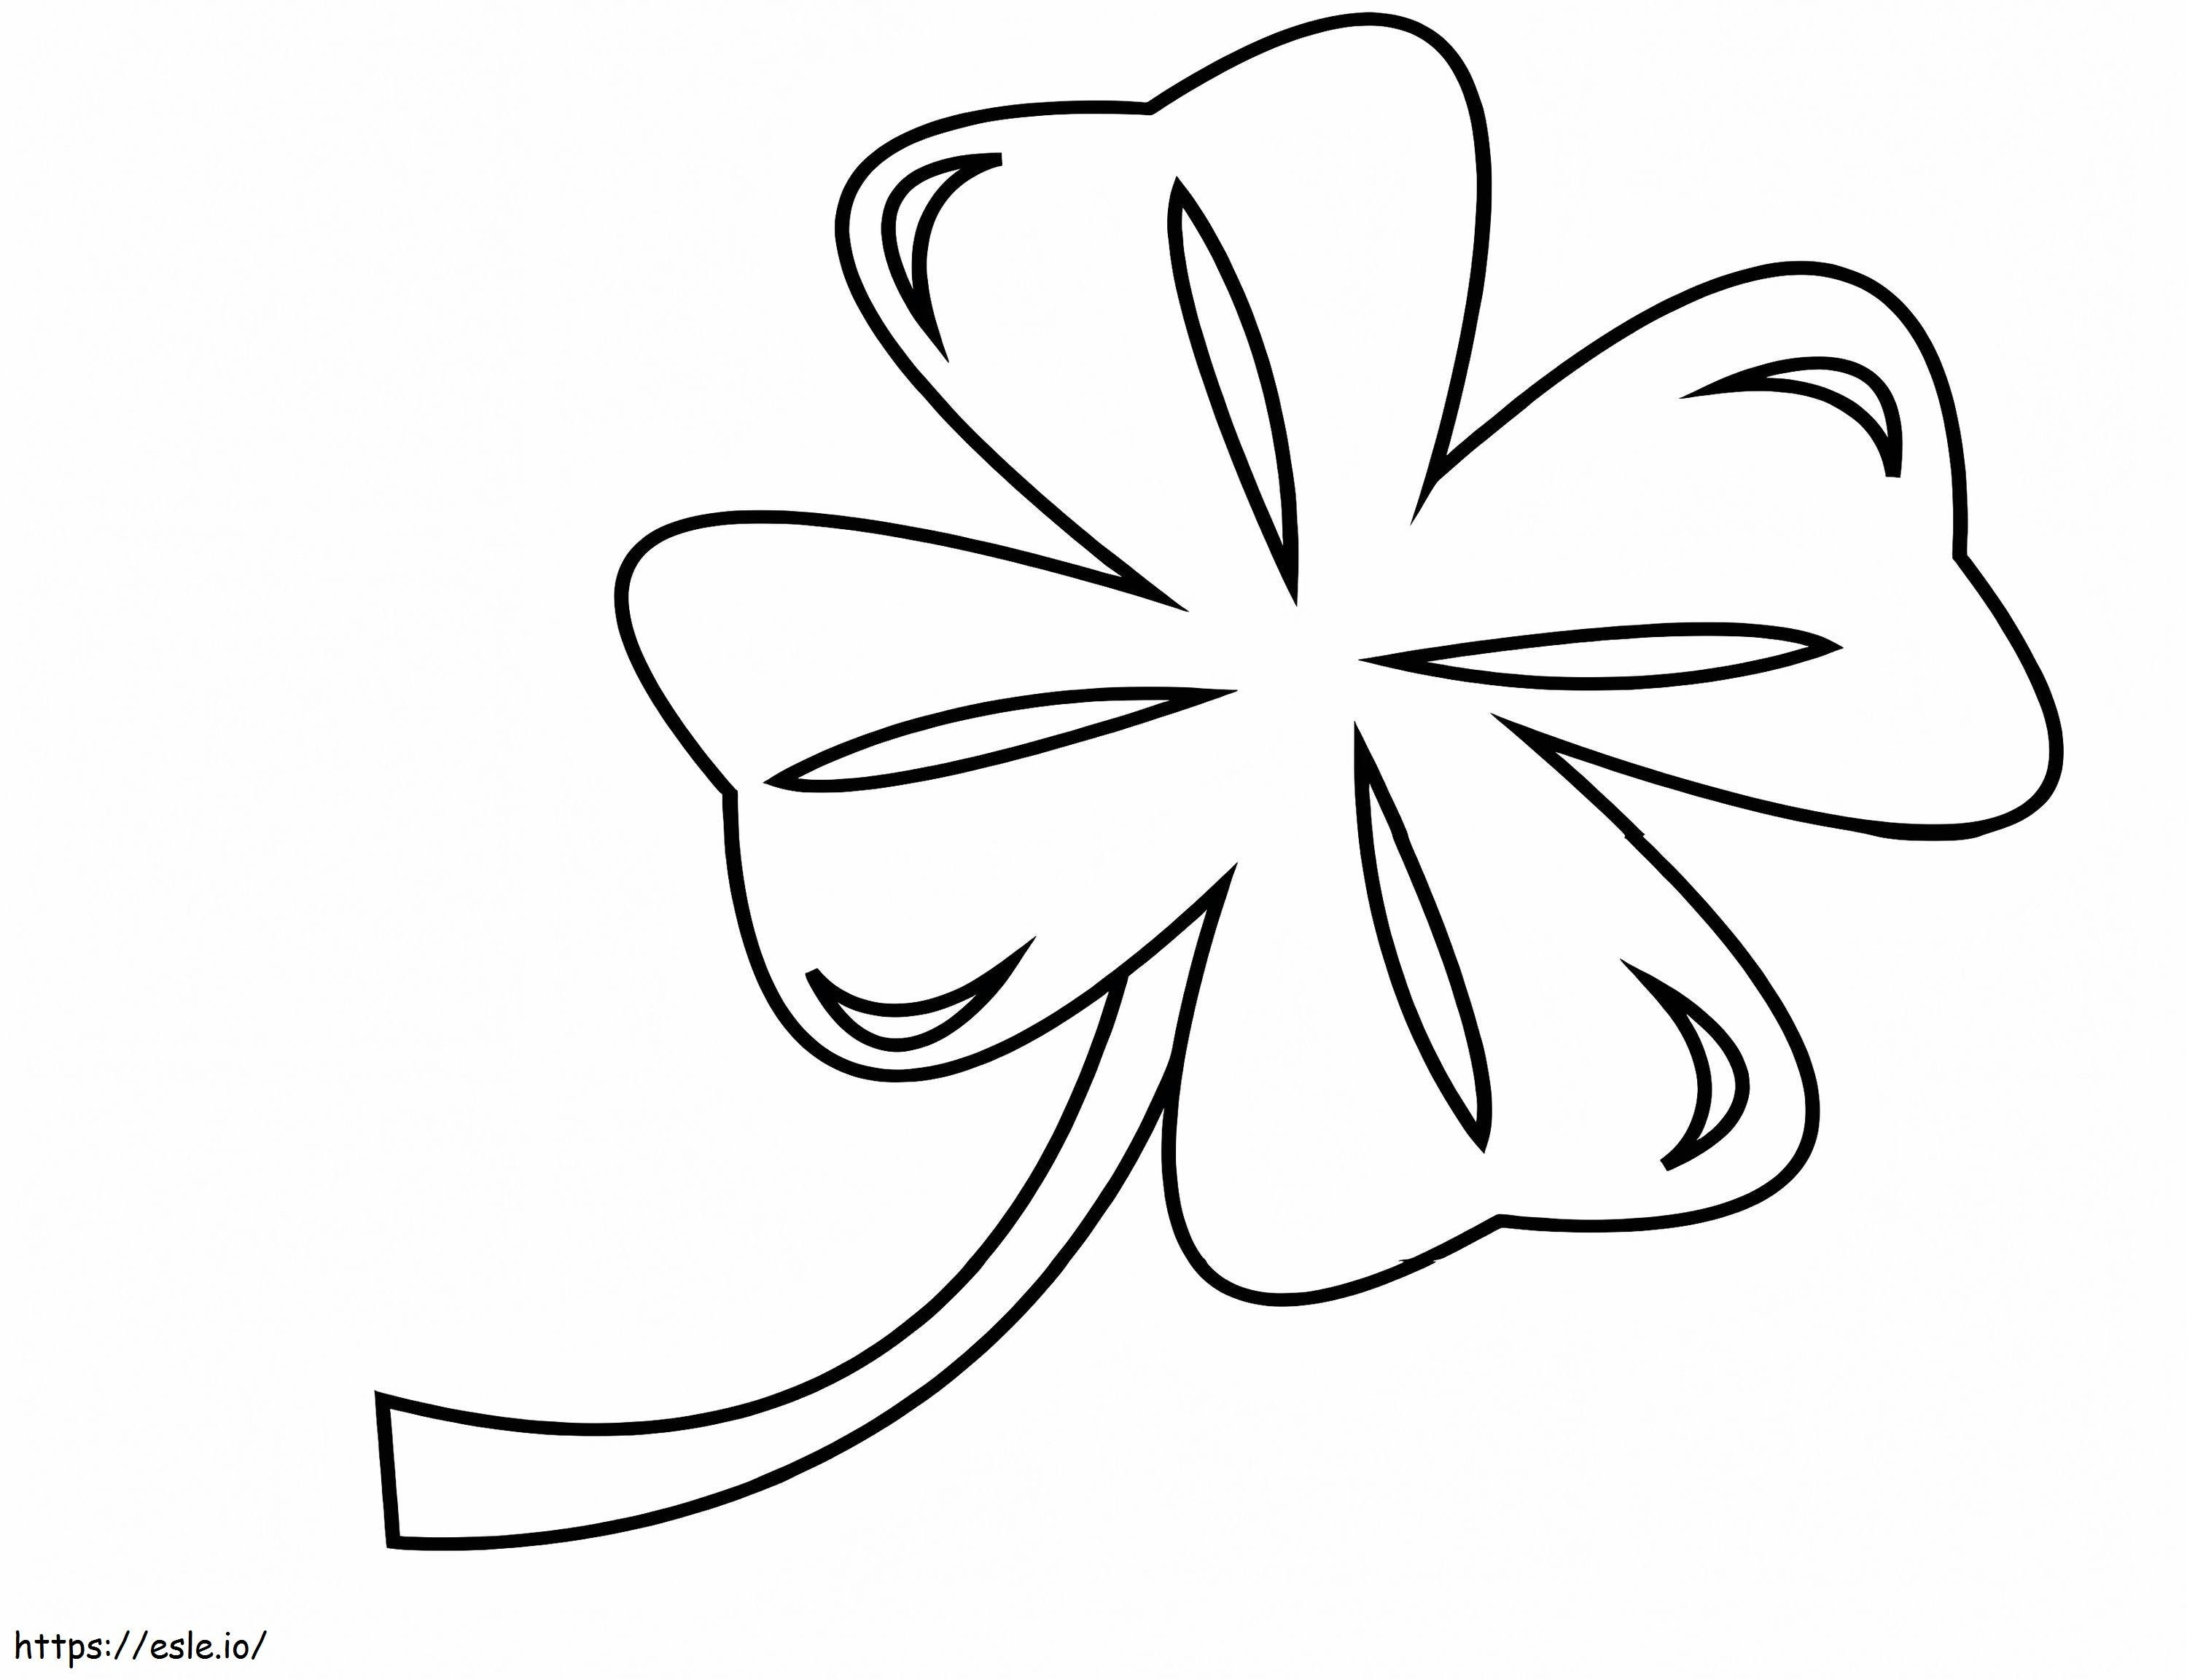 Four Leaf Clover 11 coloring page